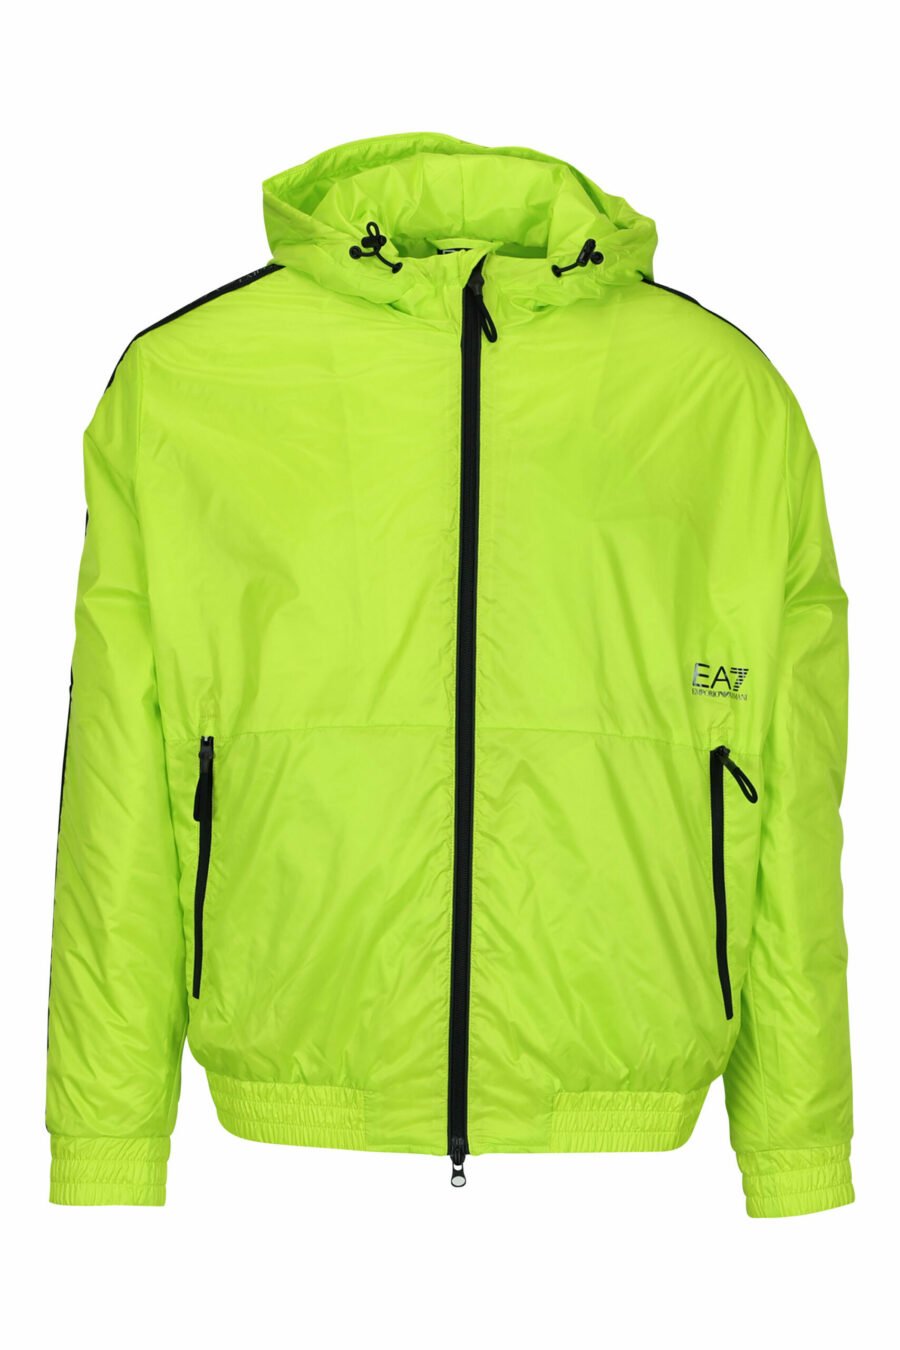 Lime green waterproof jacket with hood, white side lines and "lux identity" logo - 8057970709060 scaled